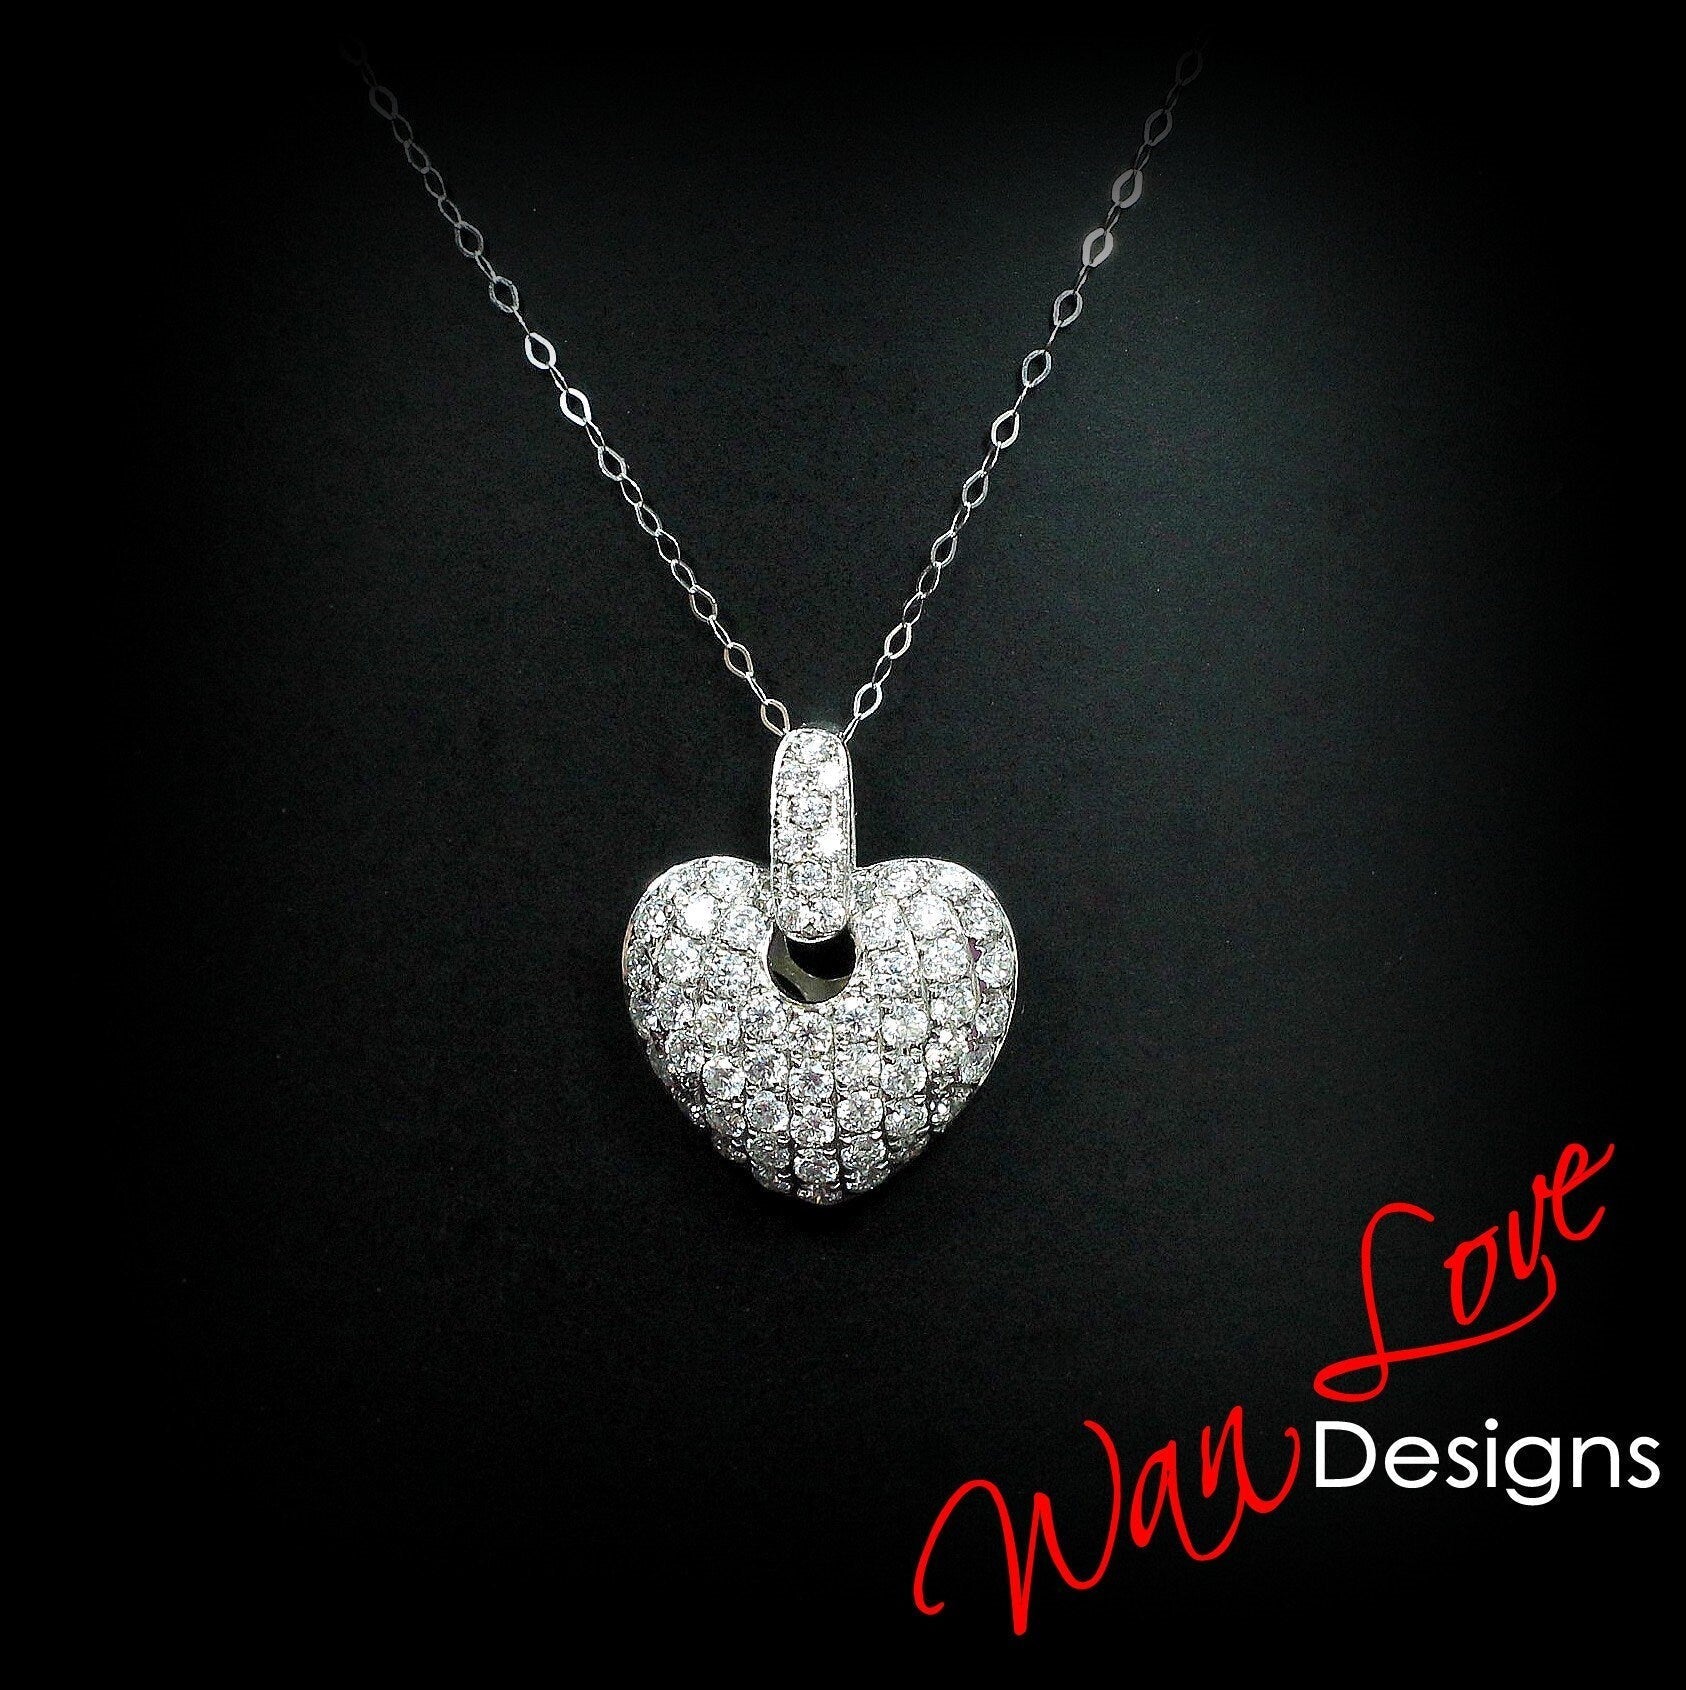 Antique Heart Moissanite Pendant, Wedding Pendant, Bridal Set, Pave Setting, Anniversary Gift, Wedding Jewelry, Special Gift For Her. Wan Love Designs